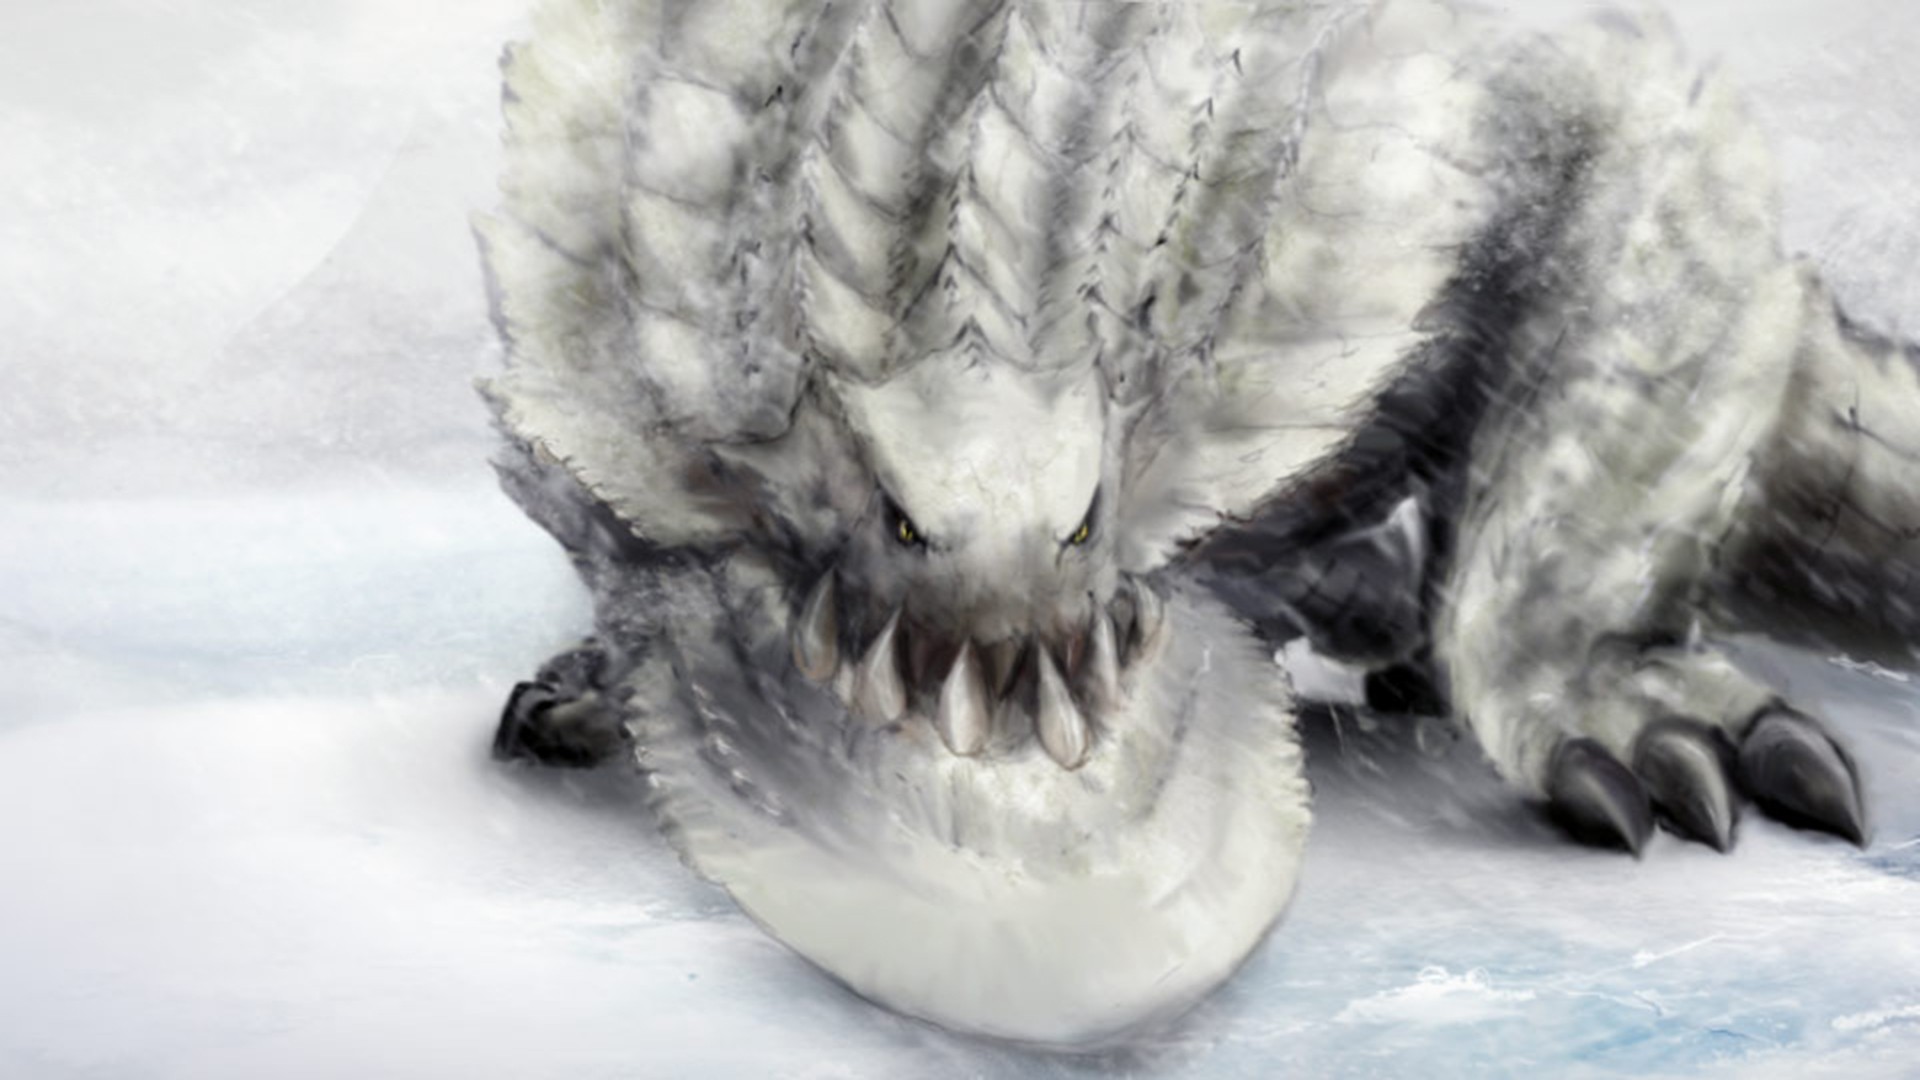 Snow Ukanlos Of The Game Monster Hunter Wallpaper And Image